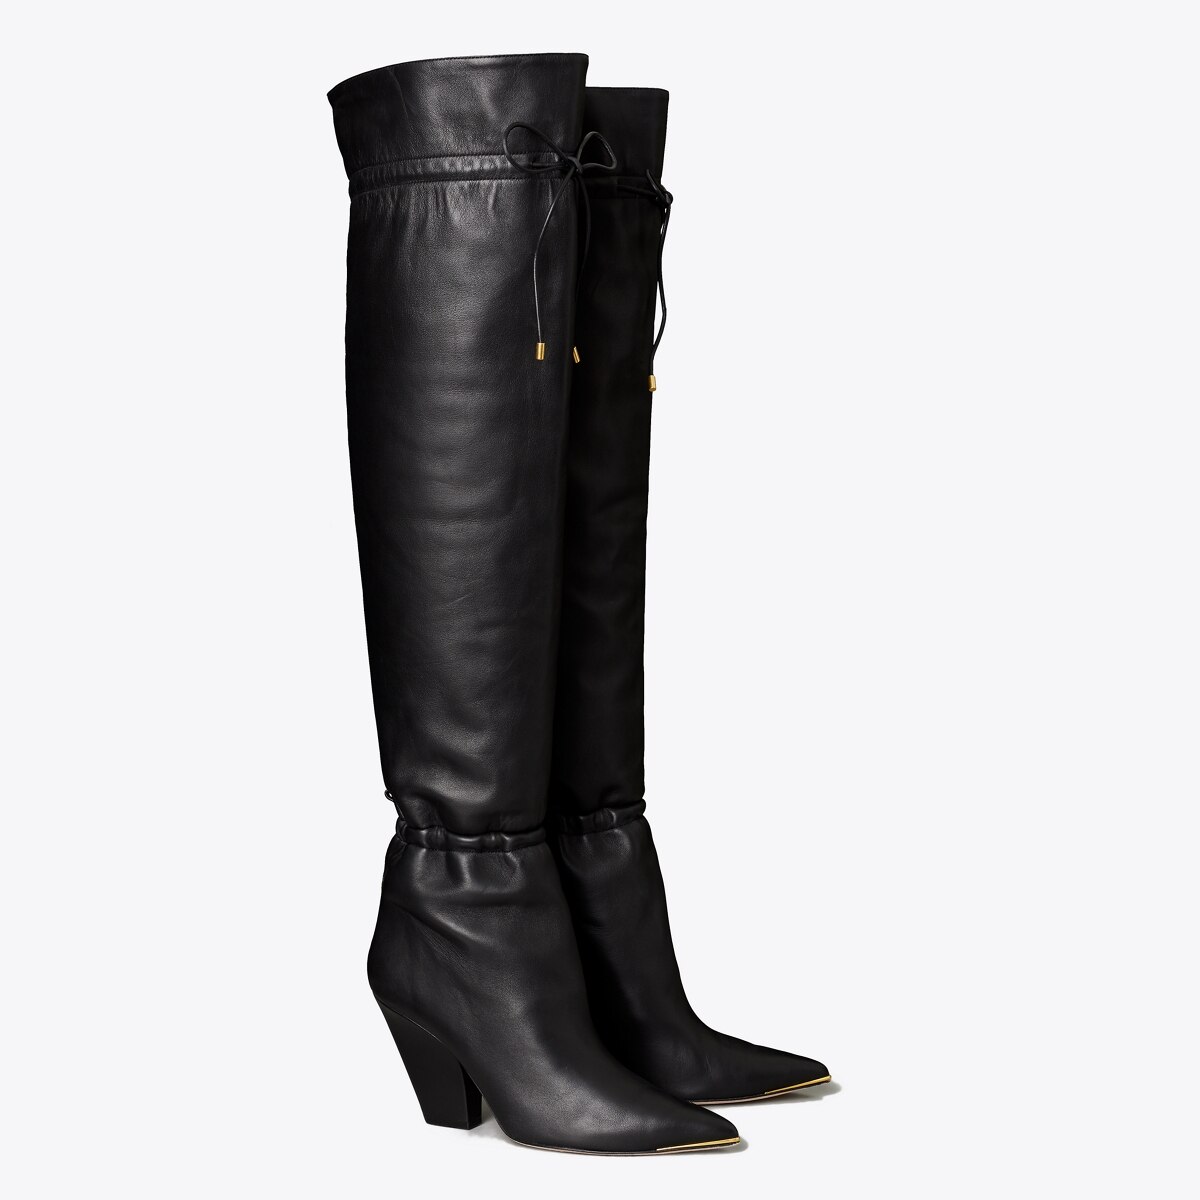 17 Best Over-The-Knee Boots That'll Make A Statement